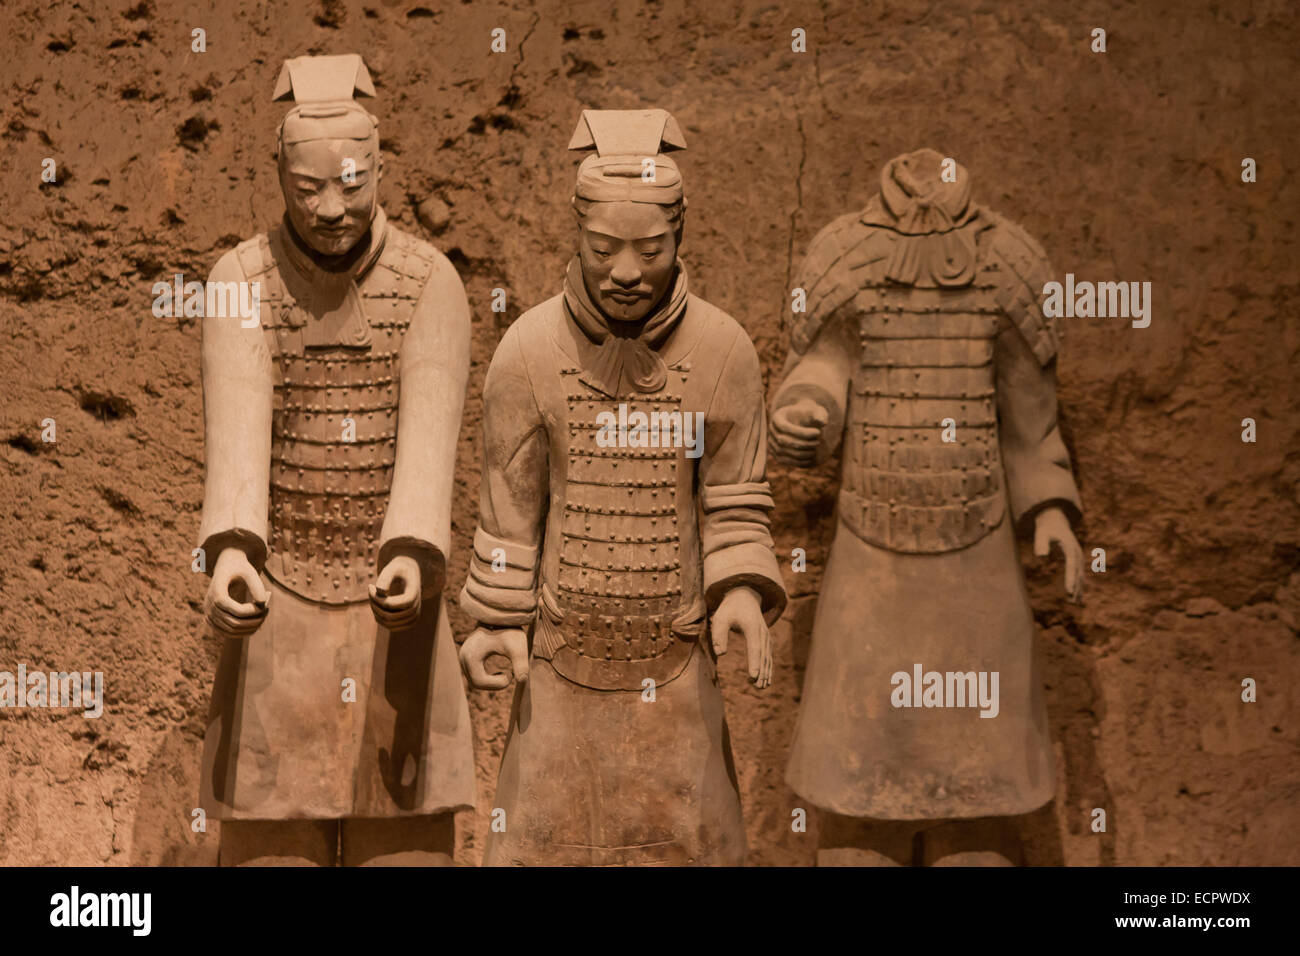 soldiers of the Terracotta Army, Mausoleum of the First Qin Emperor, Xian; Xi an; plenty; ancient warriors; art; sculptur; china; The Terracotta Warriors Stock Photo